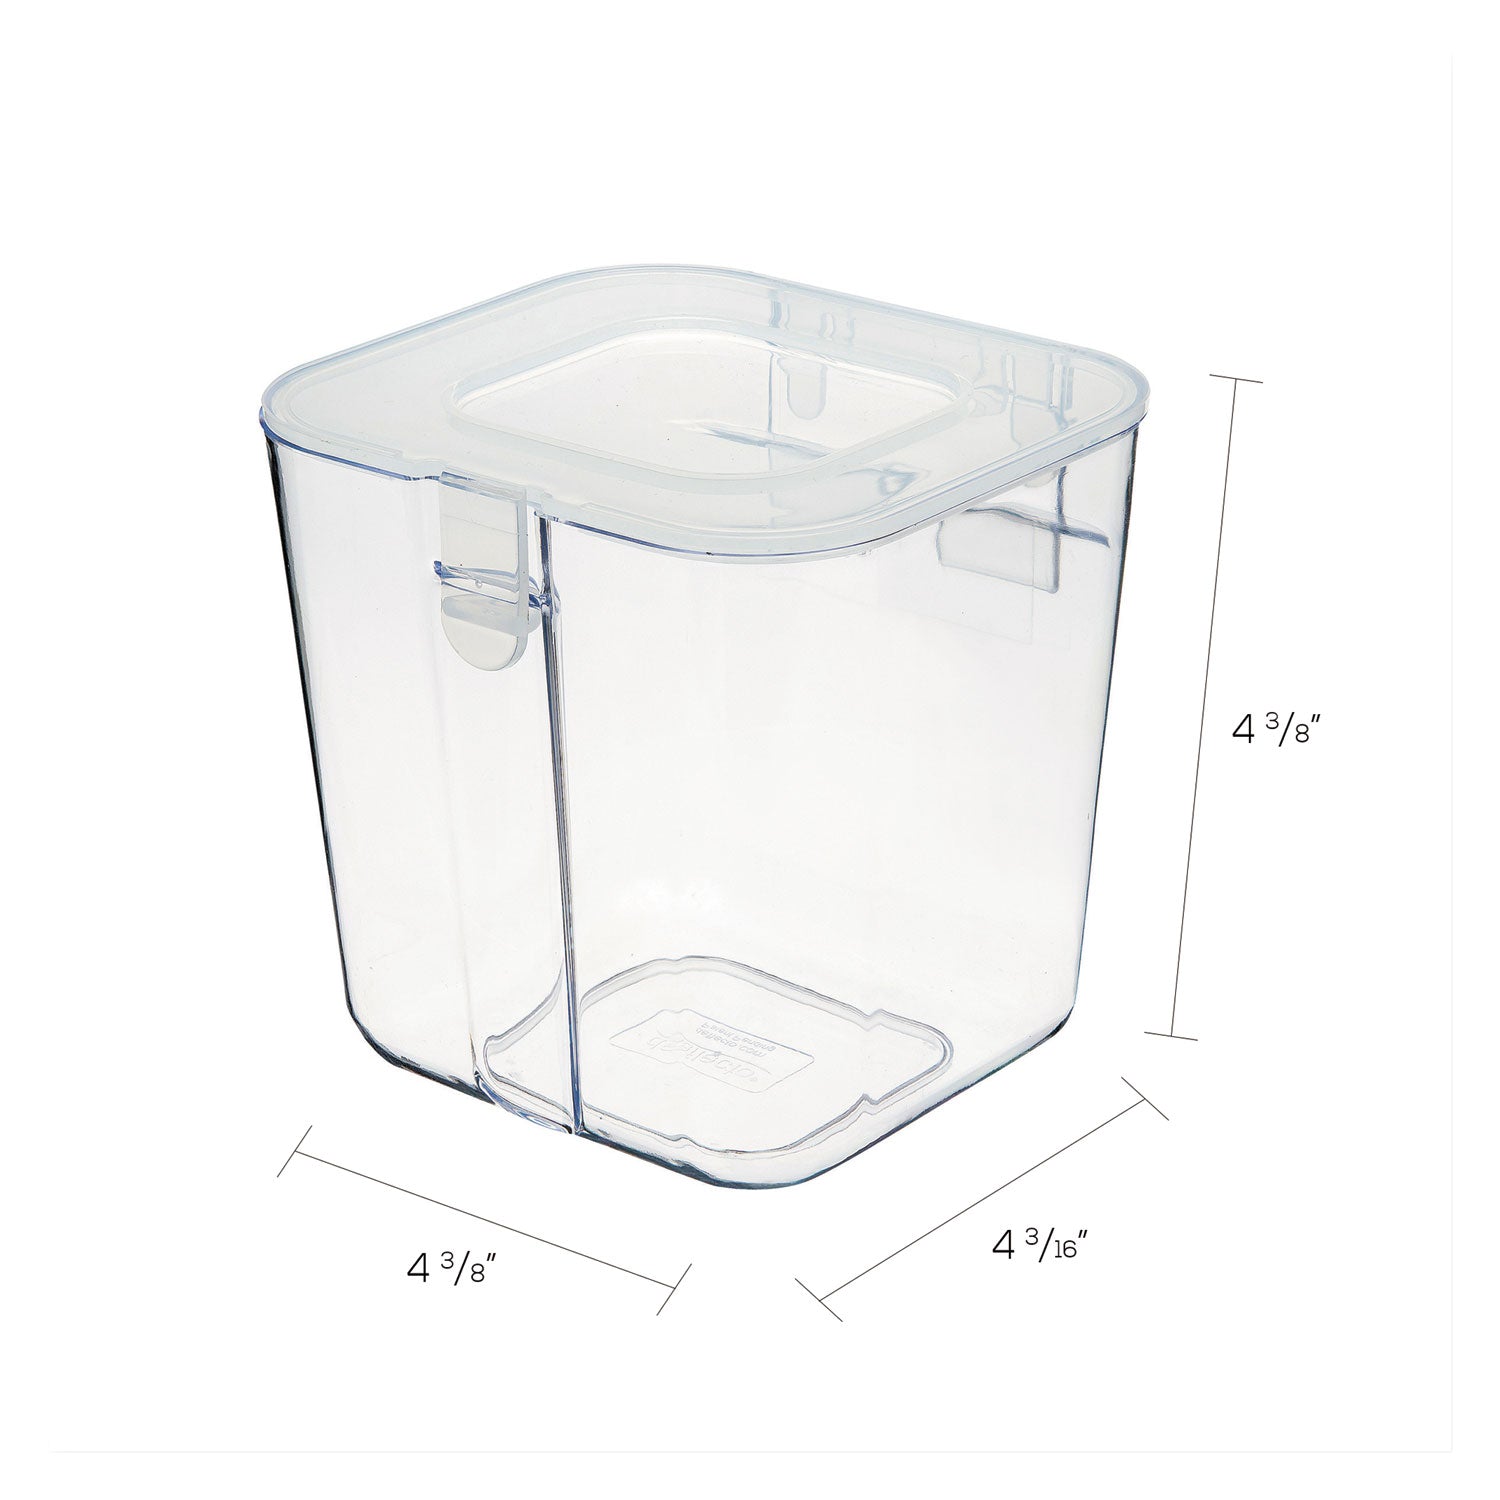 stackable-caddy-organizer-small-plastic-433-x-4-x-438-white_def29101cr - 6